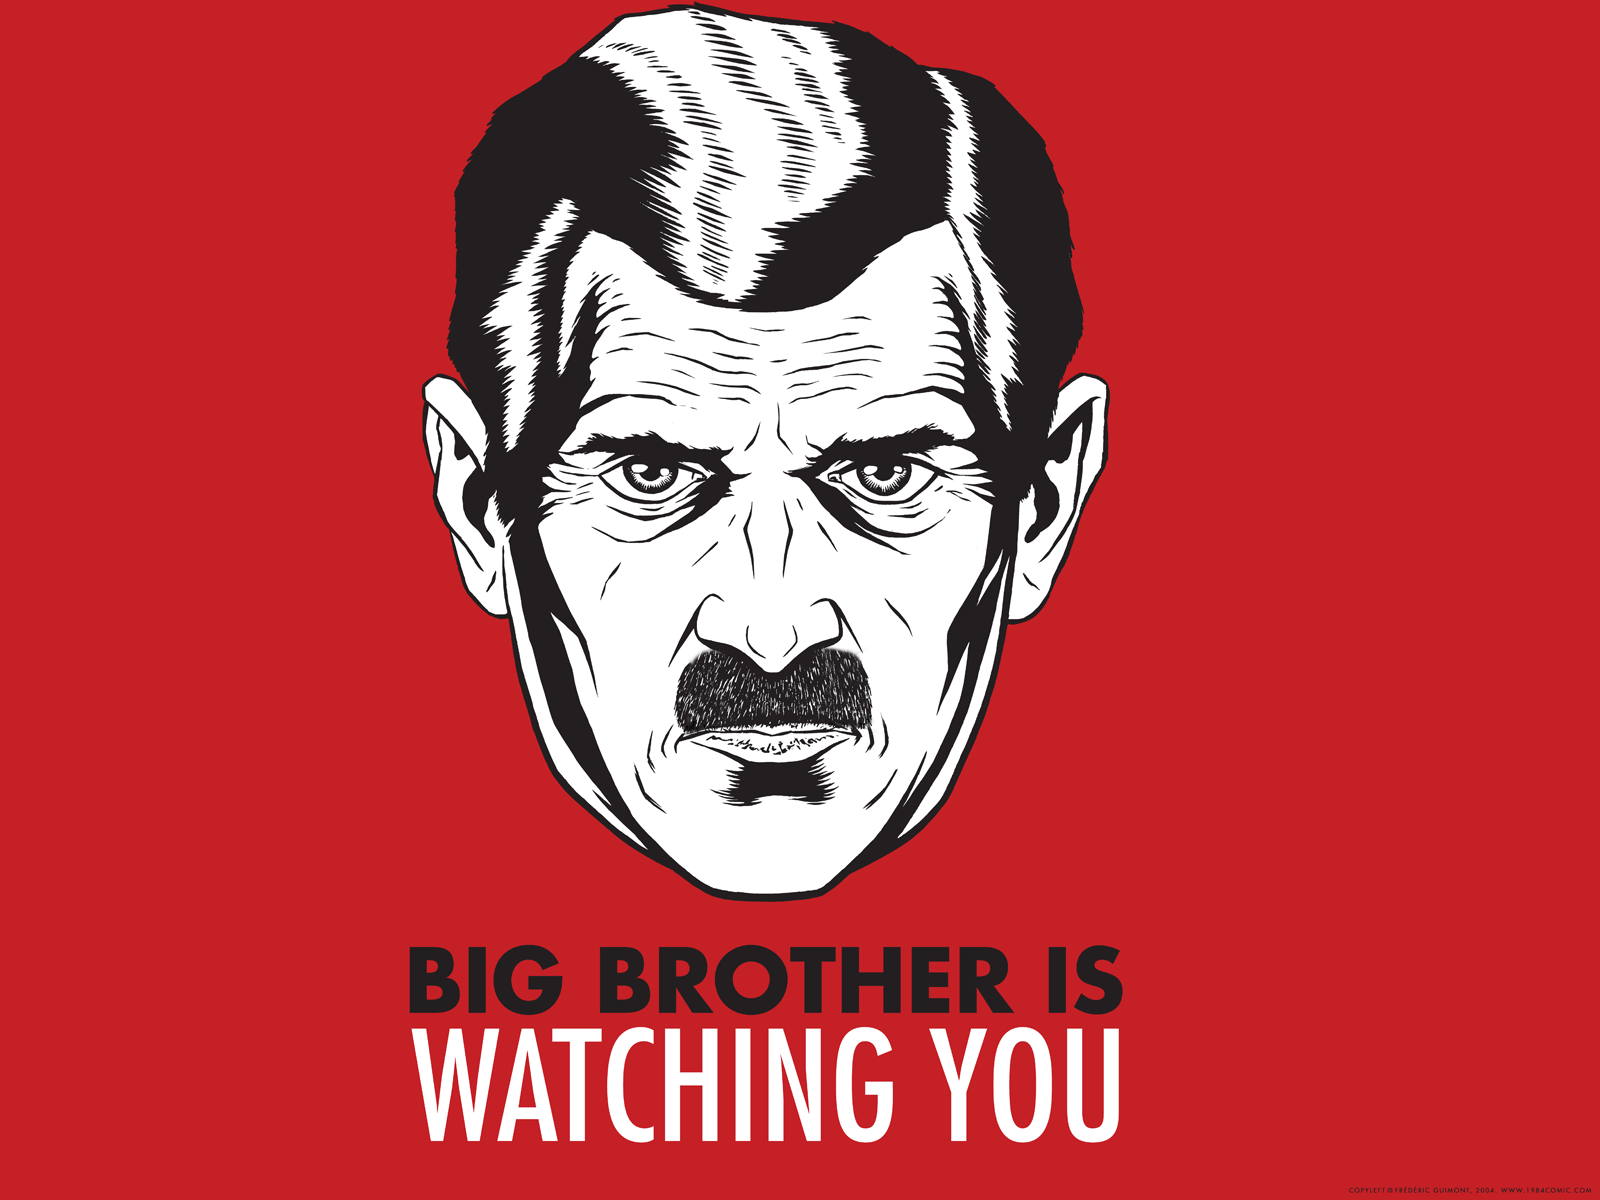 http://lifehacker.ru/wp-content/uploads/2013/07/big-brother-is-watching-you.png